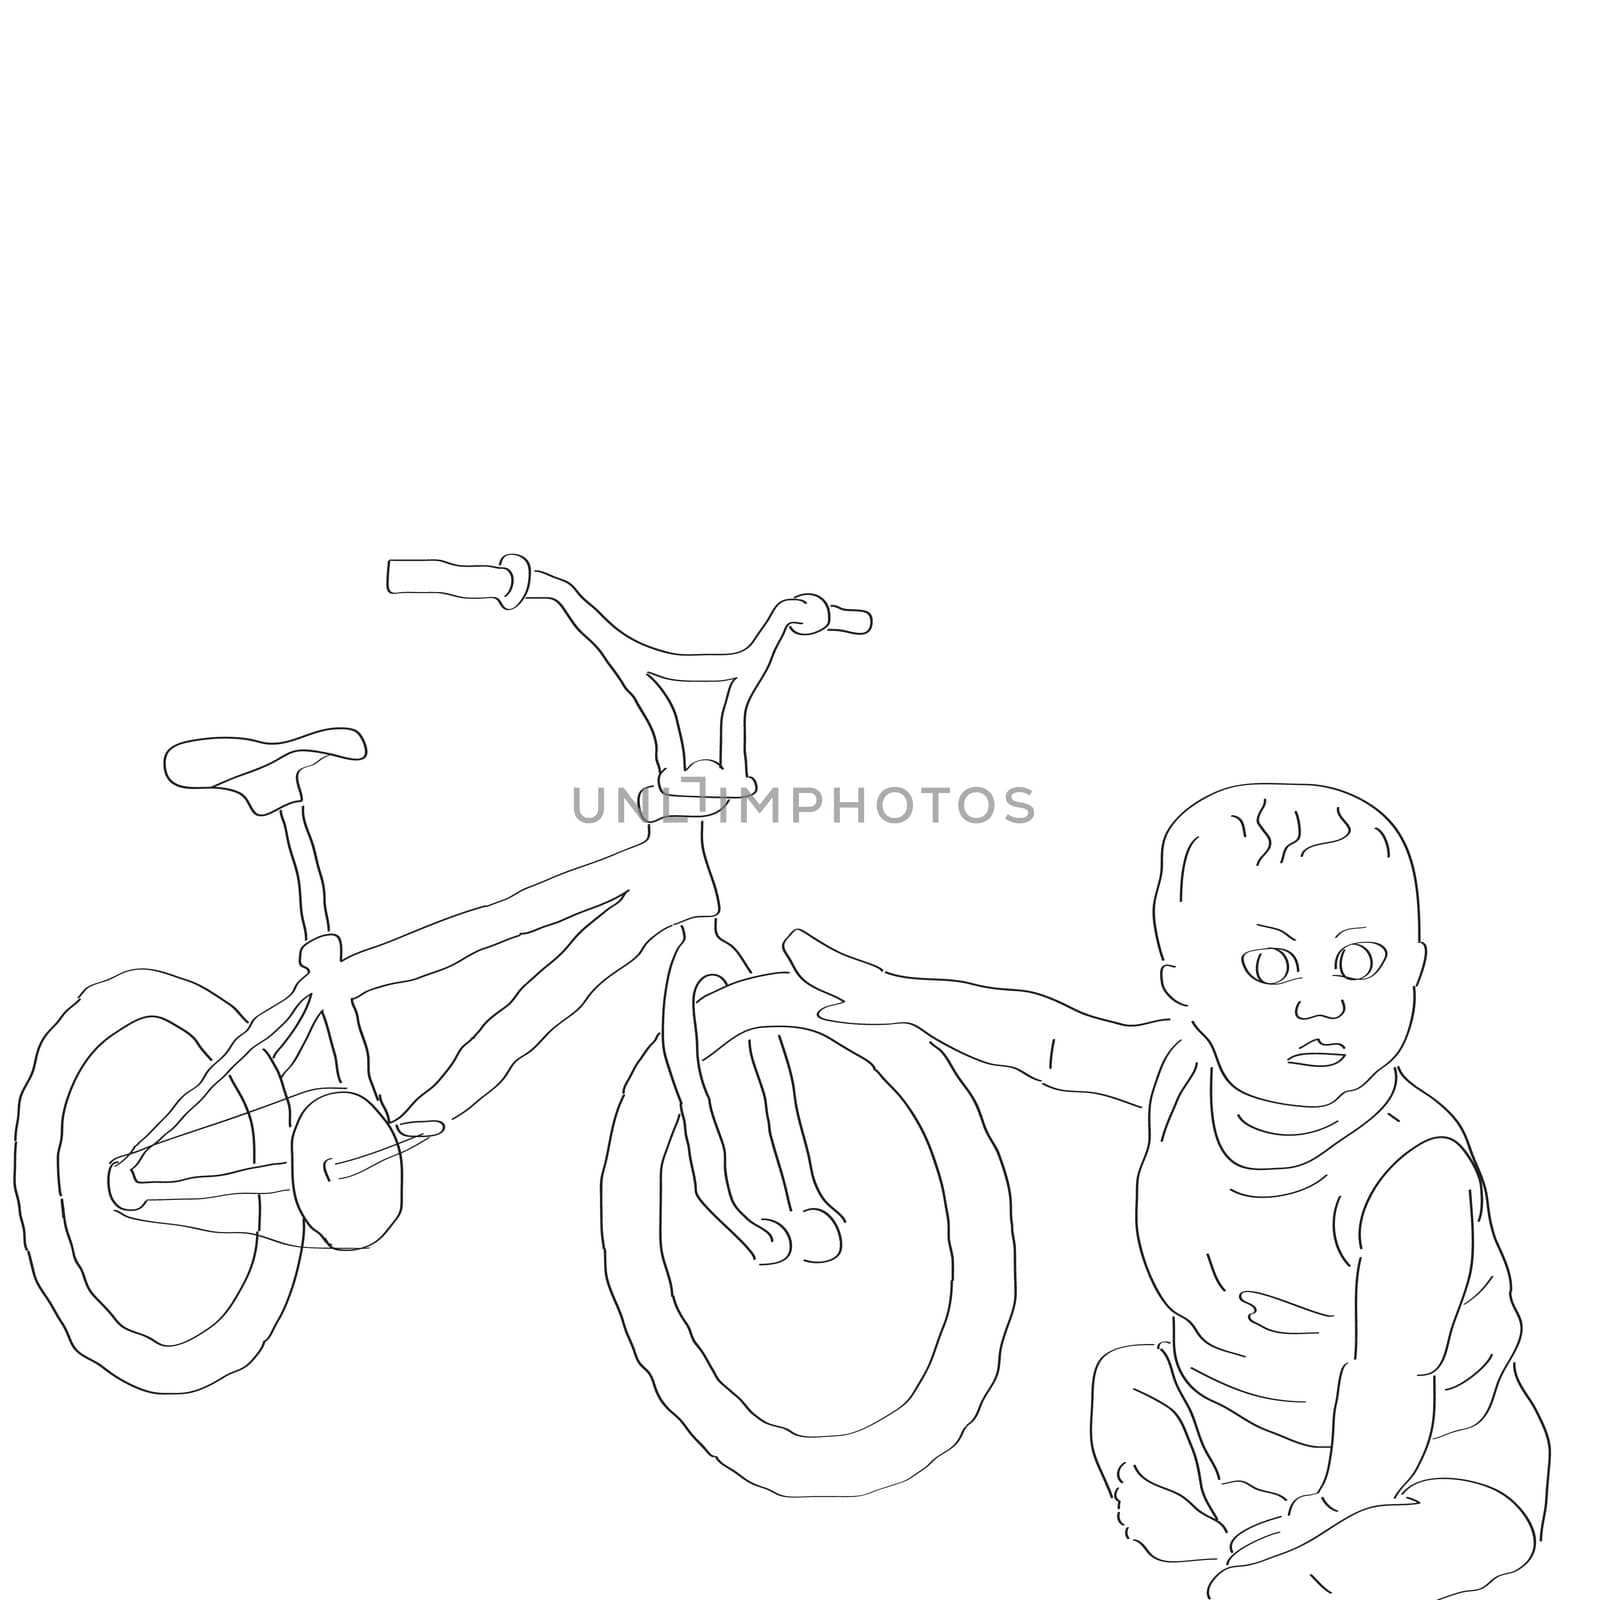 nice simple card with little boy and bicycle